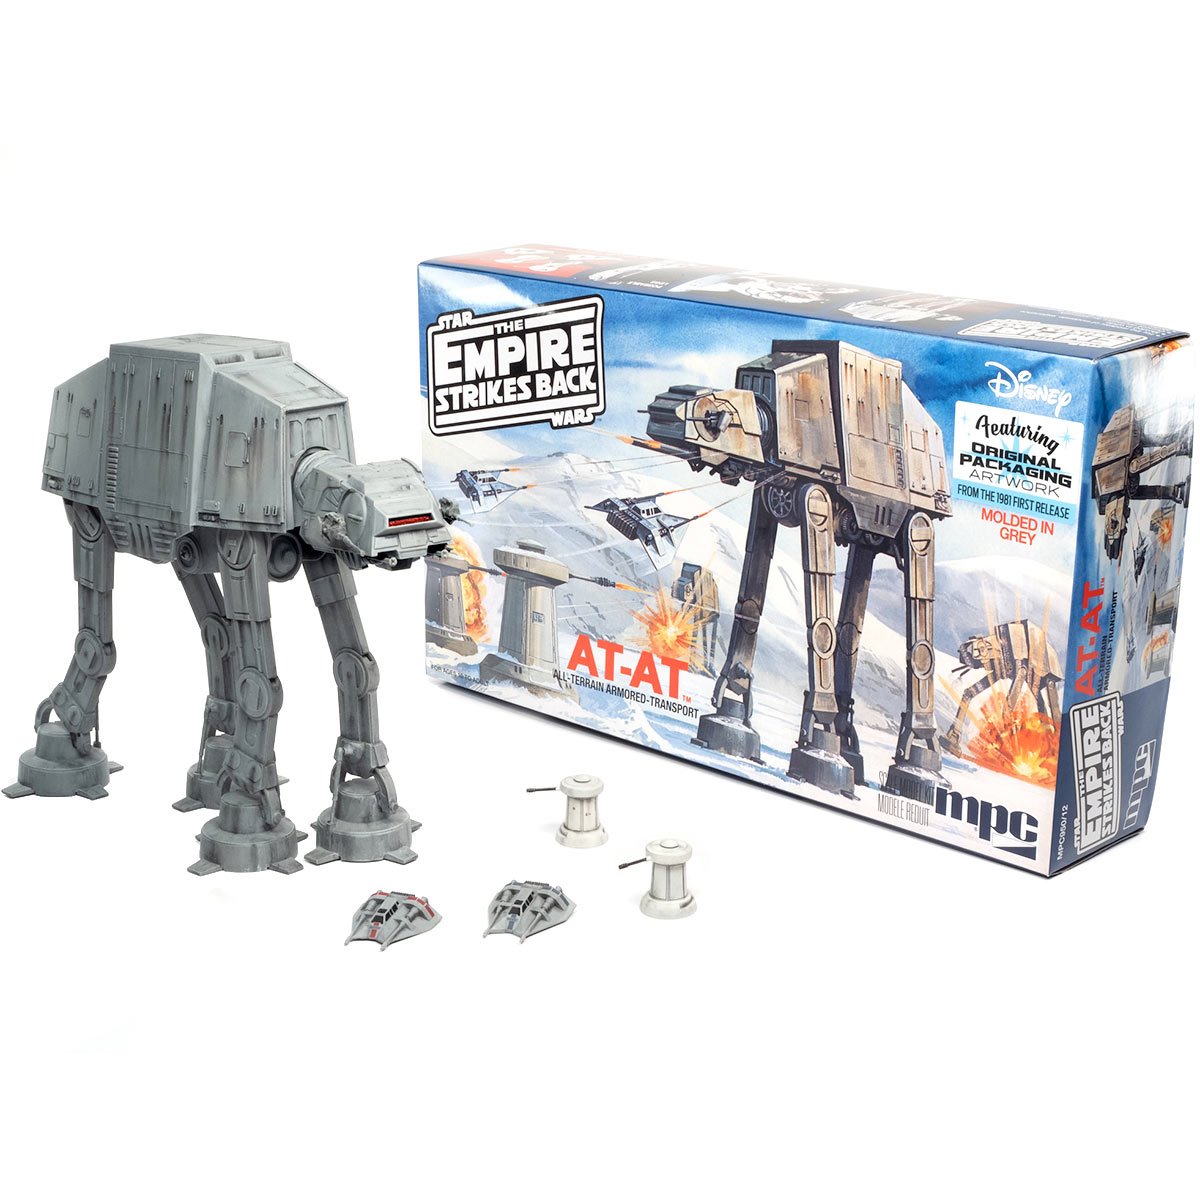 Star Wars: The Empire Strikes Back AT-AT 1:100 Scale Model Kit